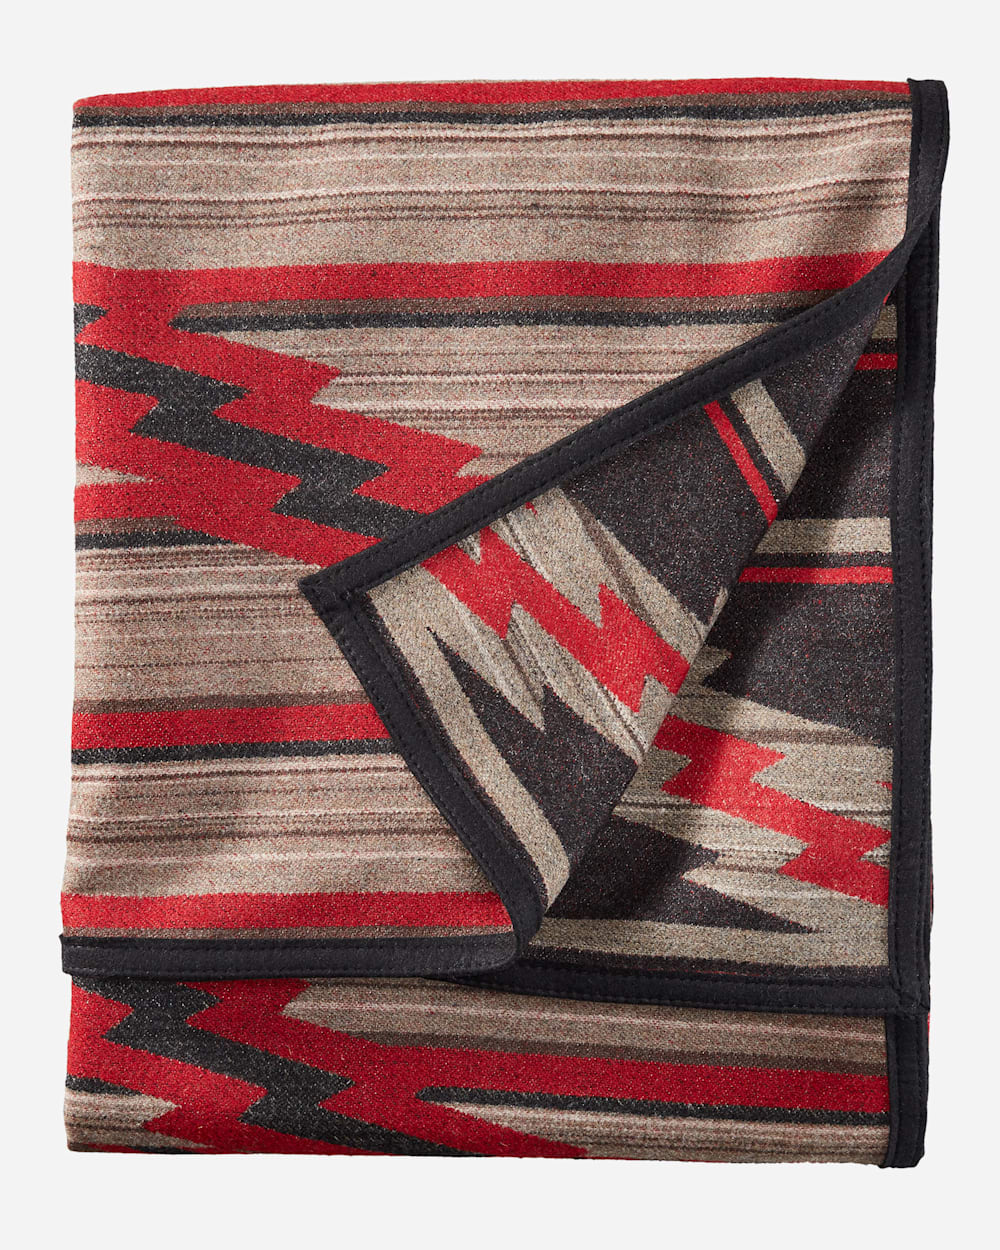 ALTERNATE VIEW OF PRESERVATION SERIES: PS03 BLANKET IN RED MULTI image number 3